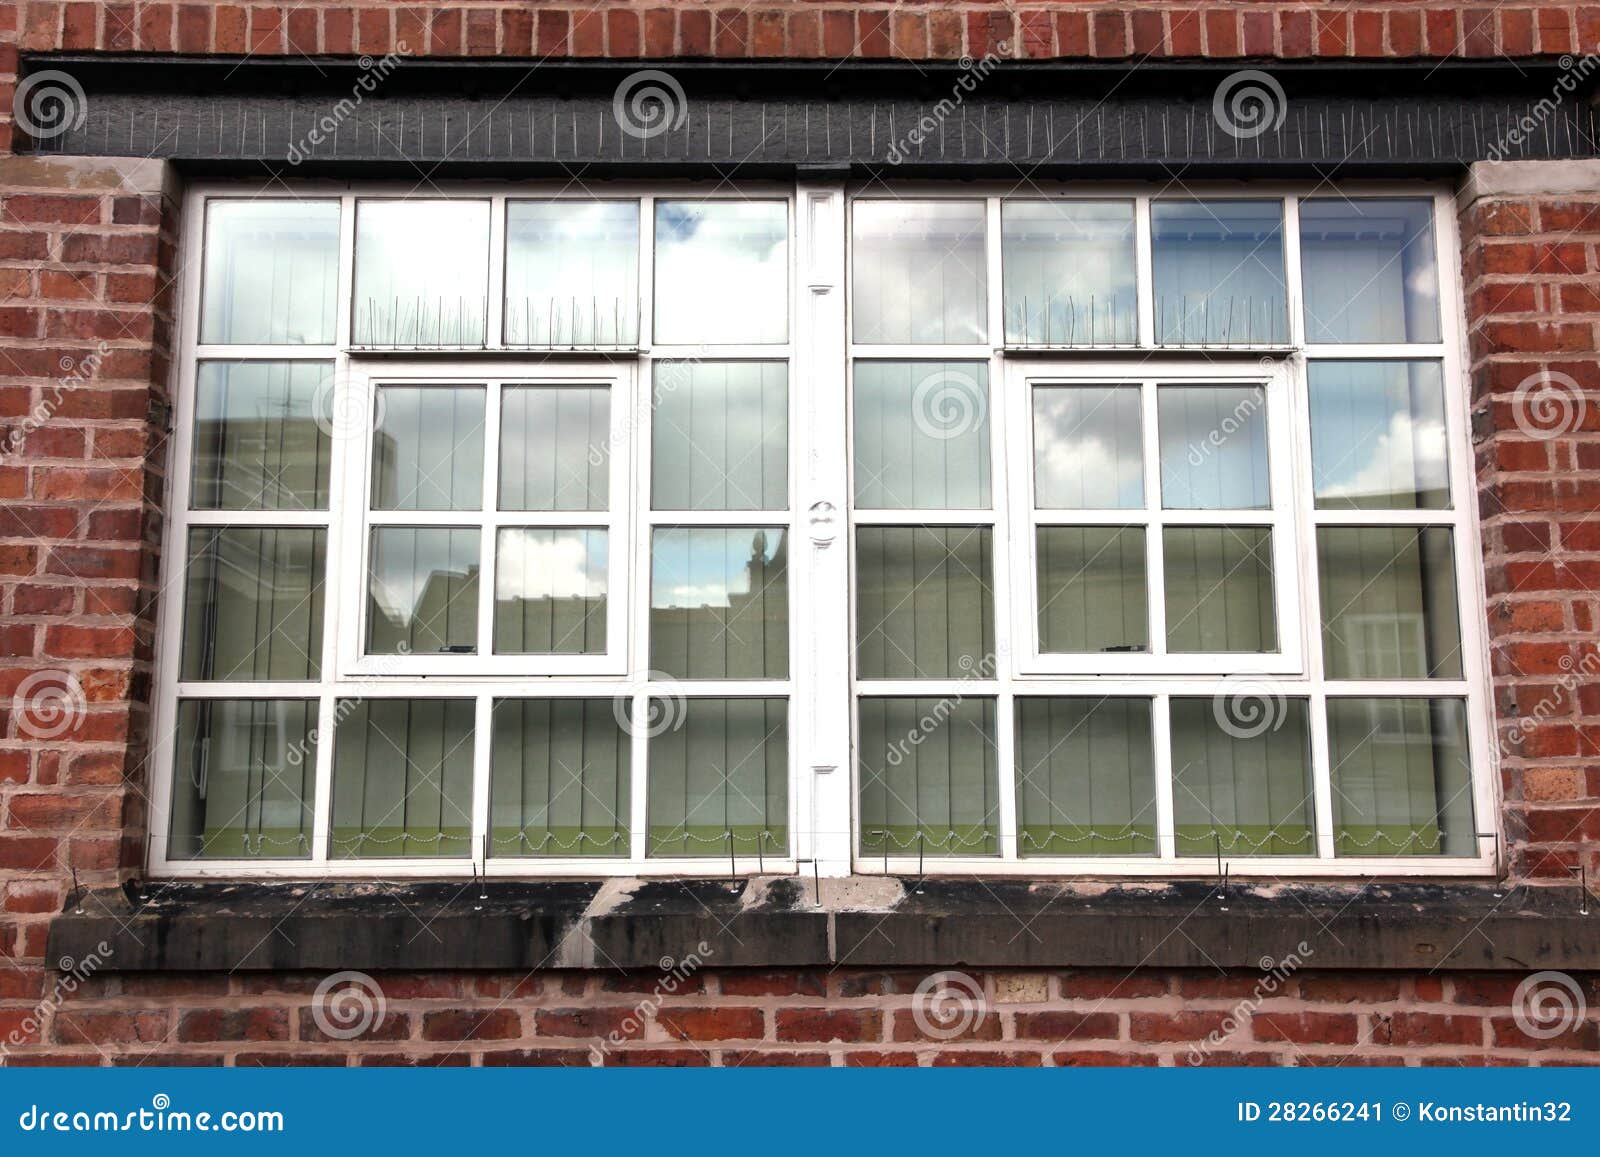 Window brick wall stock image. Image of front, structure - 28266241